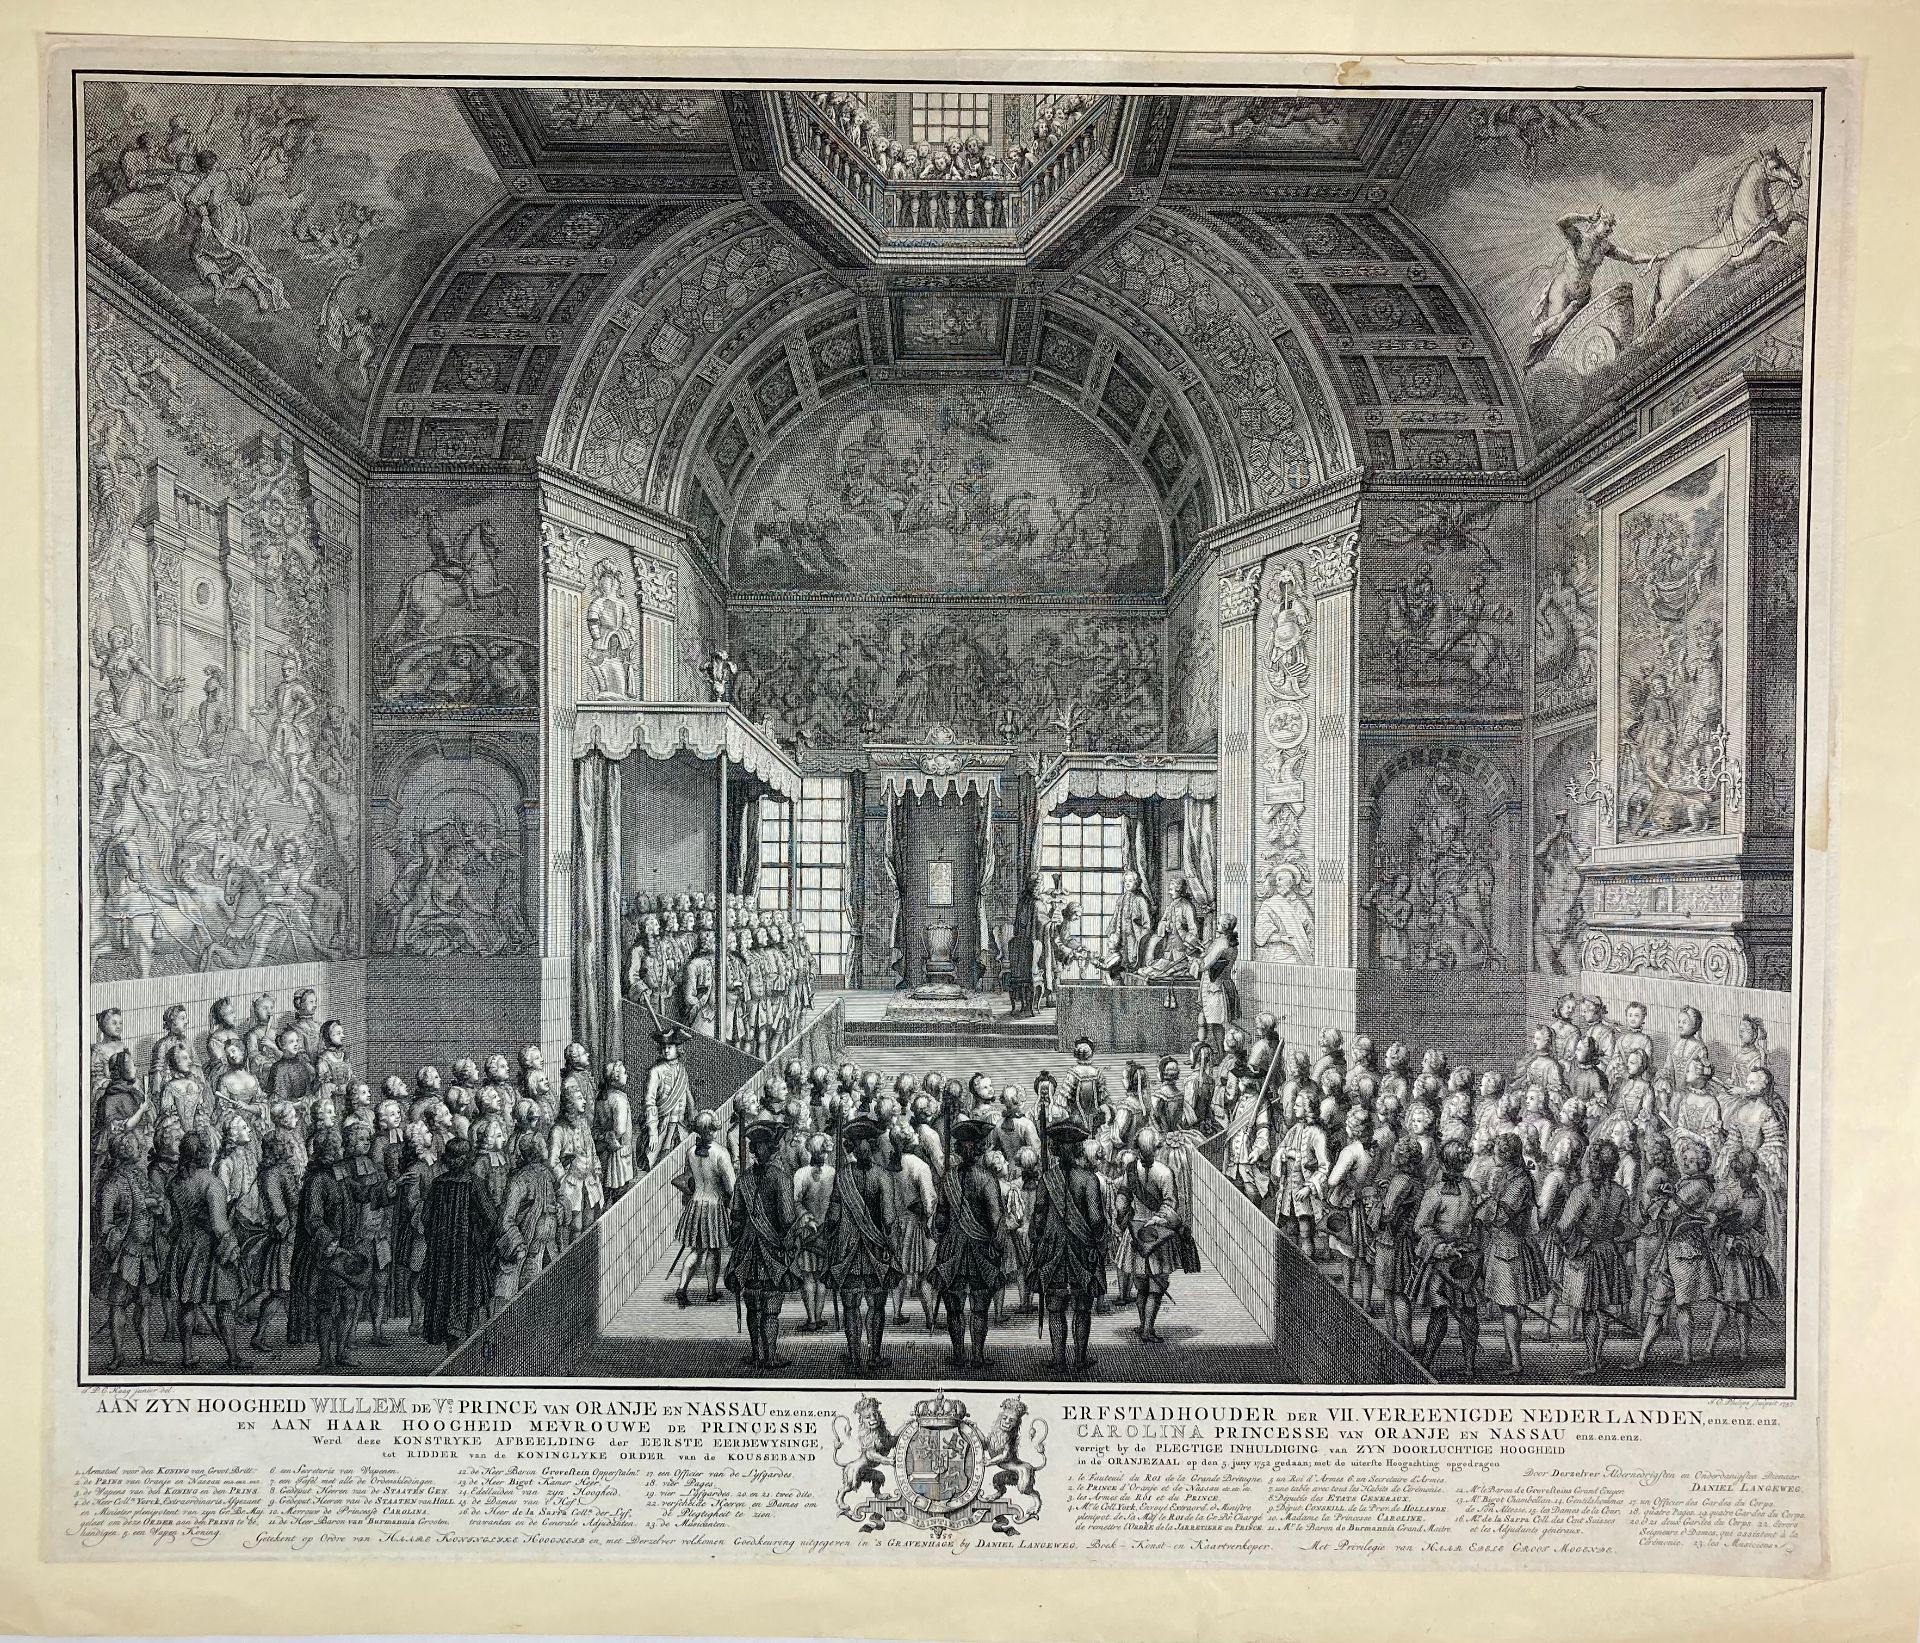 COLLECTION of 74 engraved plates representing Dutch historical events, coronations/ceremonies, gathe - Image 8 of 8